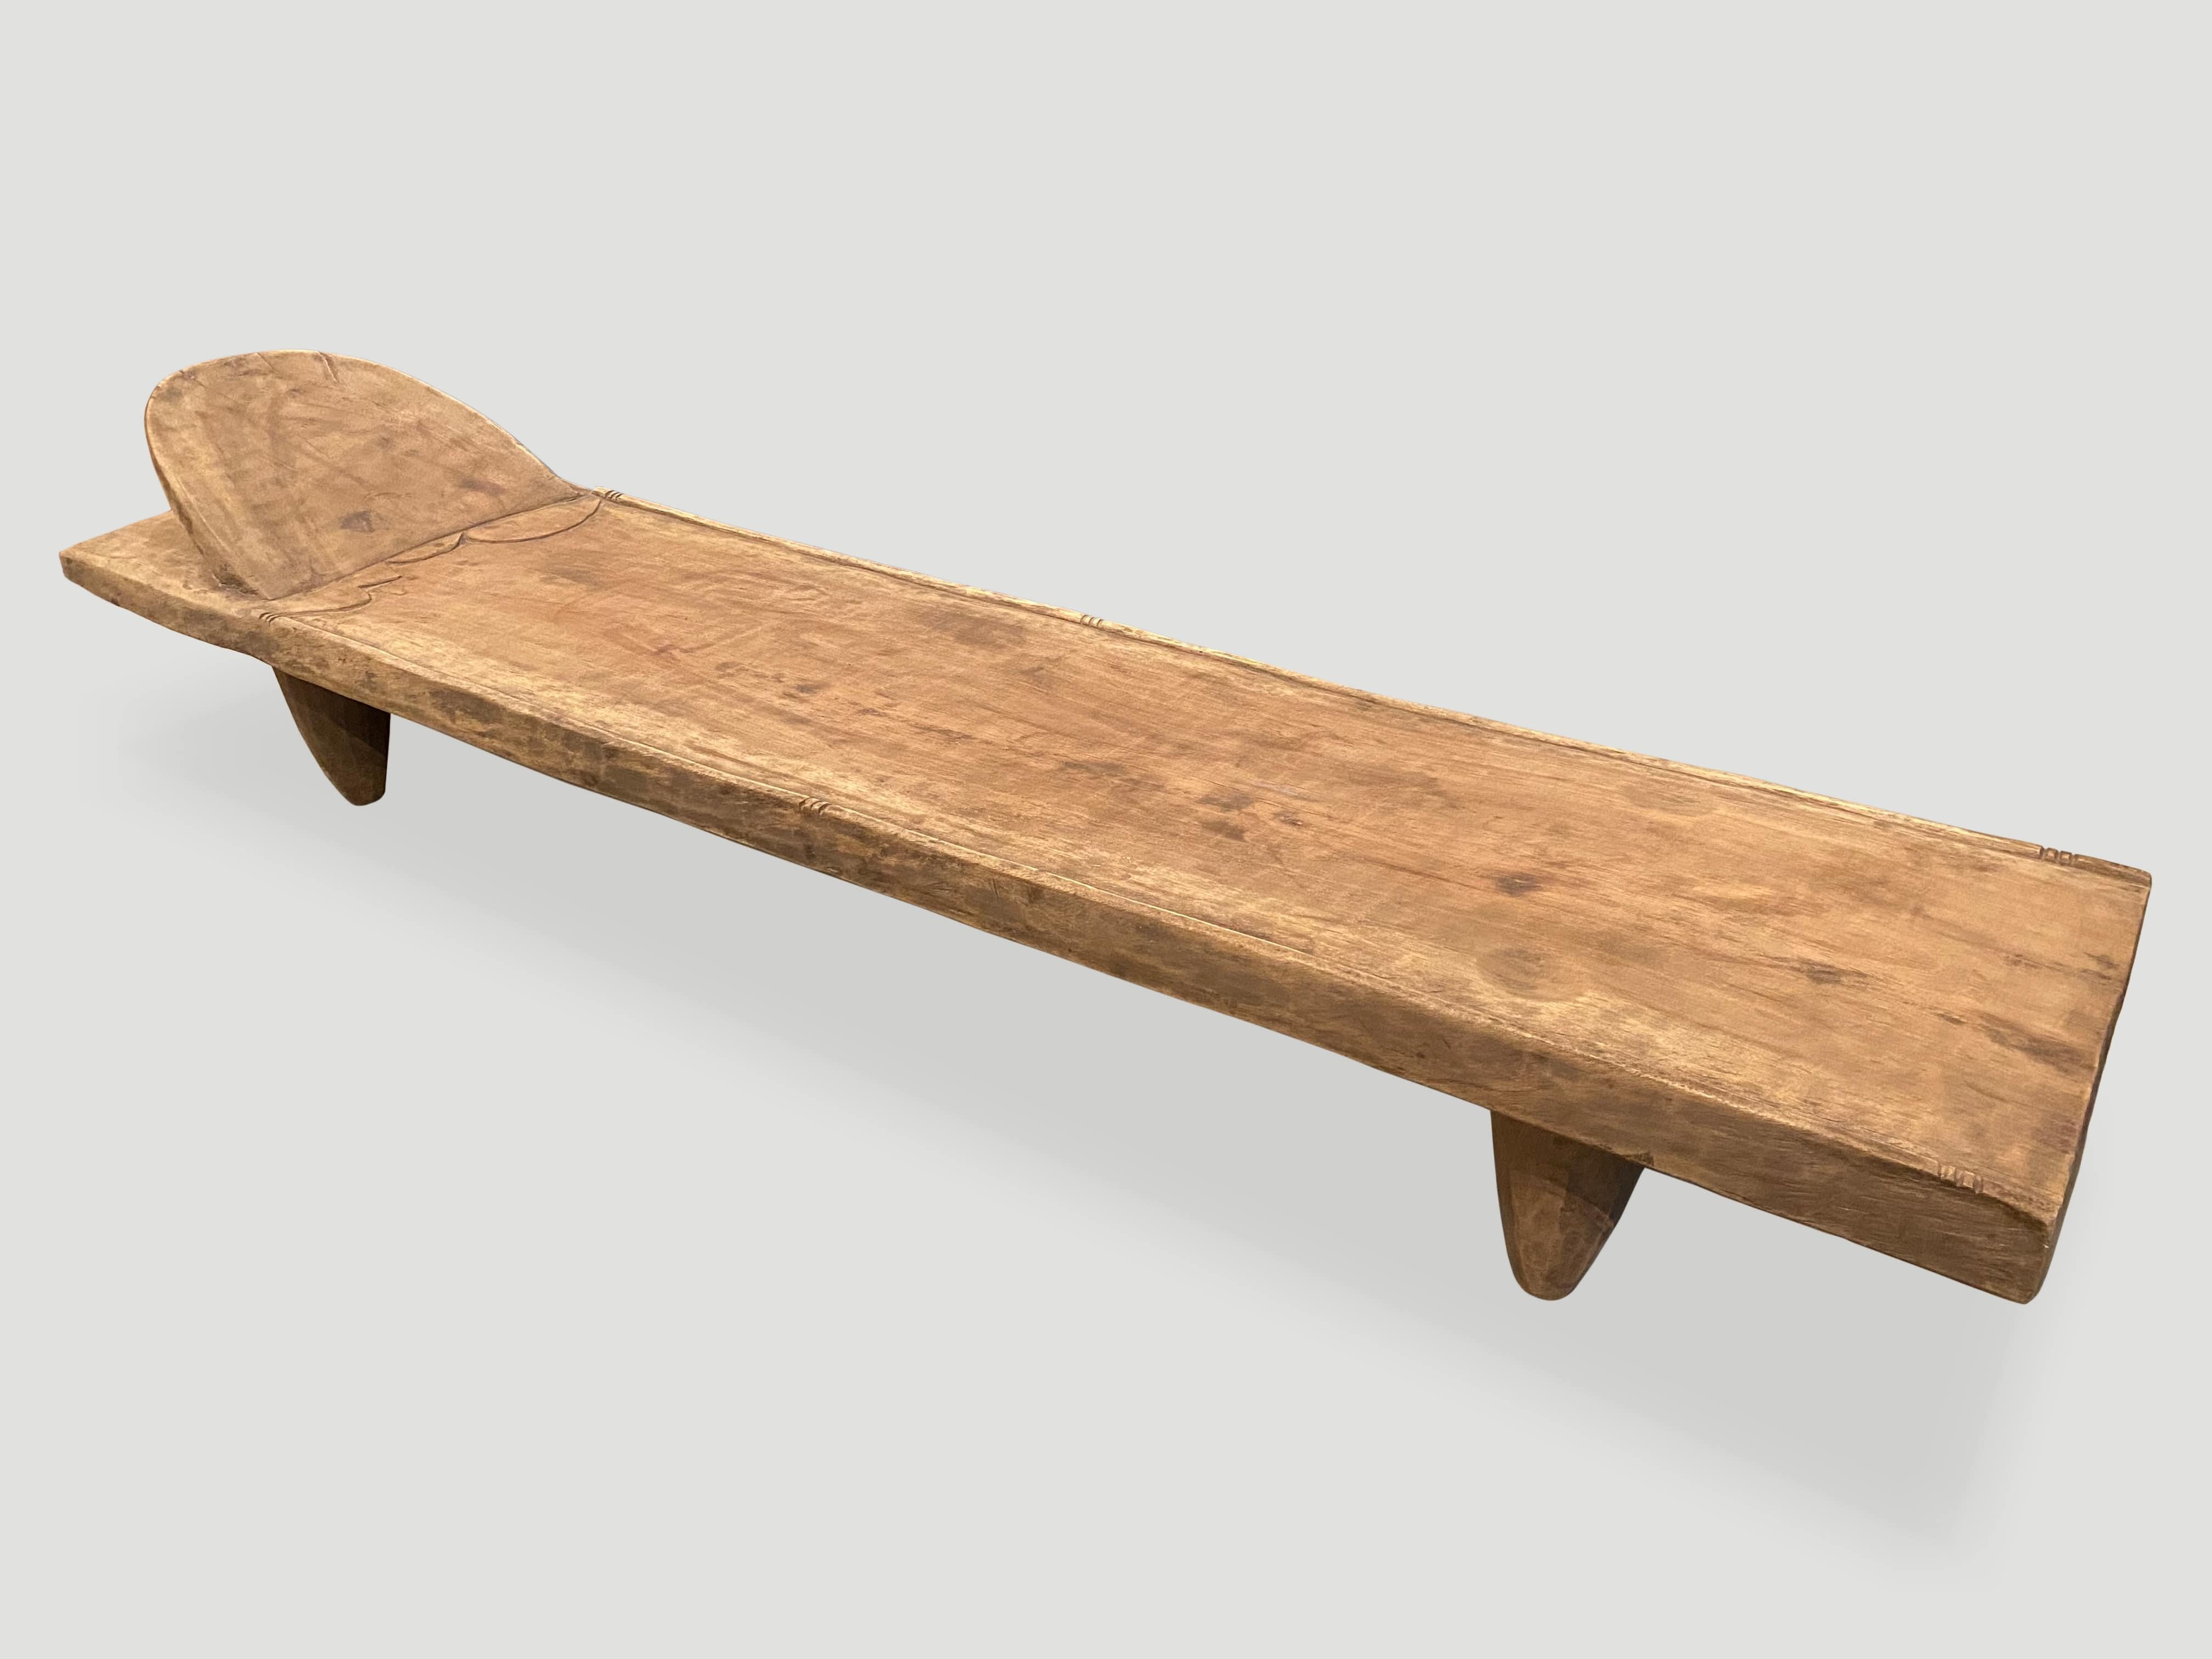 Tribal Andrianna Shamaris Cote D’ivoire Senufu Daybed, Bench or Coffee Table For Sale